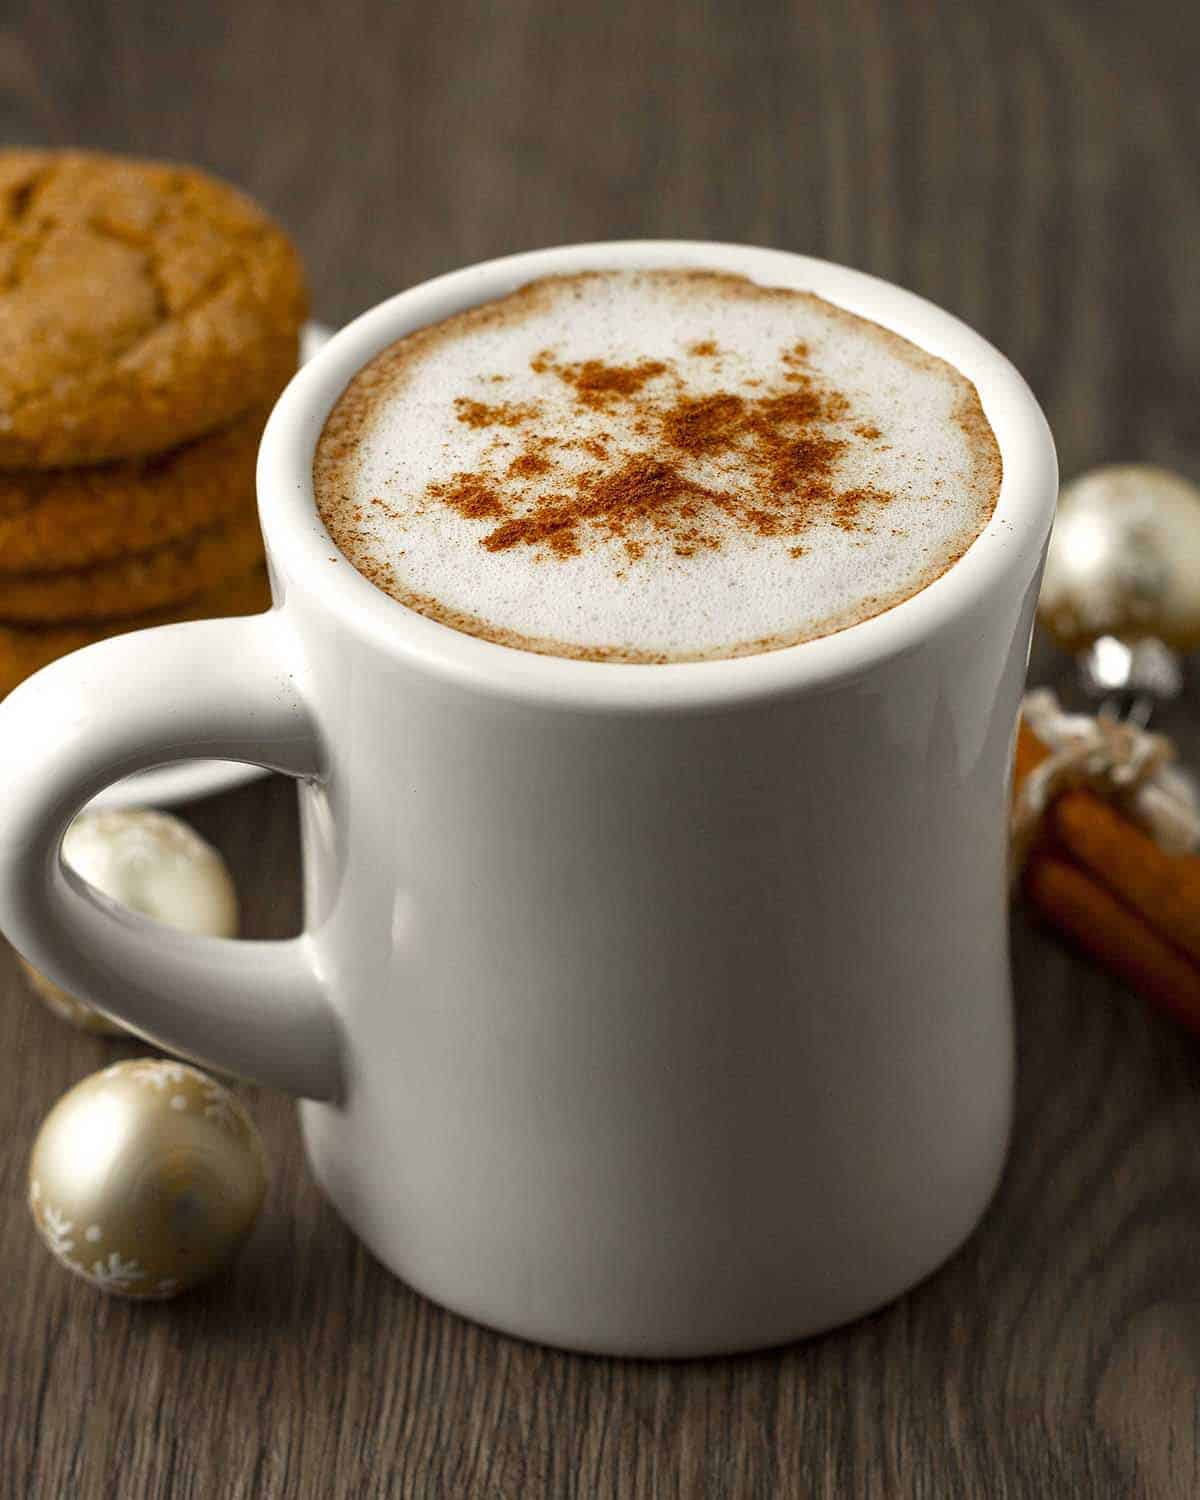 A mug filled with gingerbread latte, the drink is topped with foamed milk and a dusting of ground cinnamon.